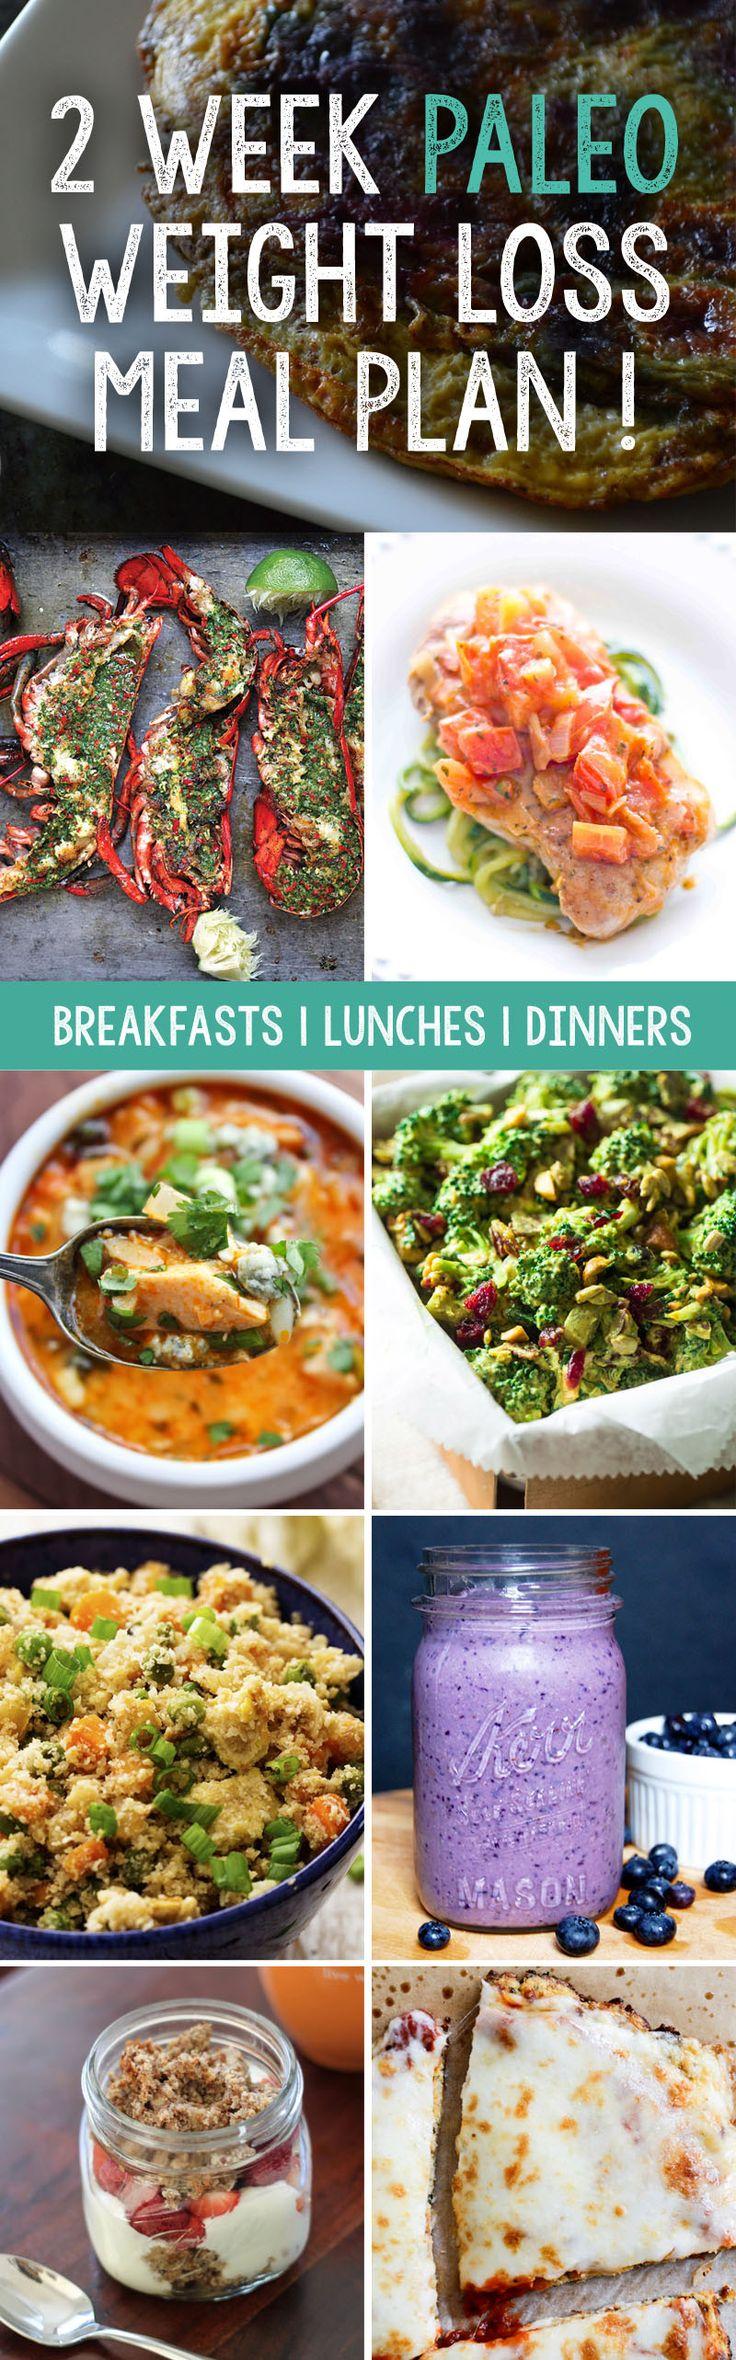 Wedding - 2 Week Paleo Meal Plan That Will Help You Lose Weight Fast!